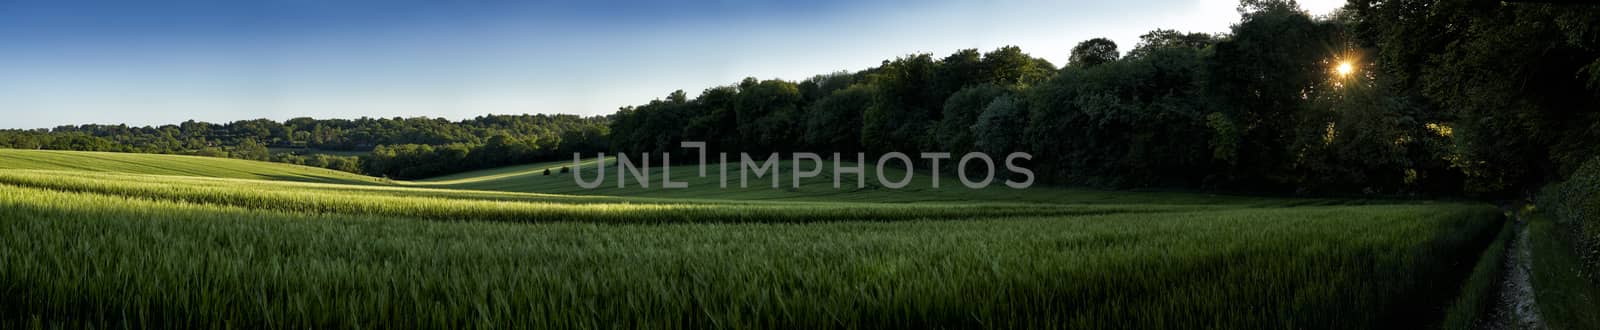 Panoramic view of green wheat growing in a field with sun setting through trees in The Chiltern Hills,England